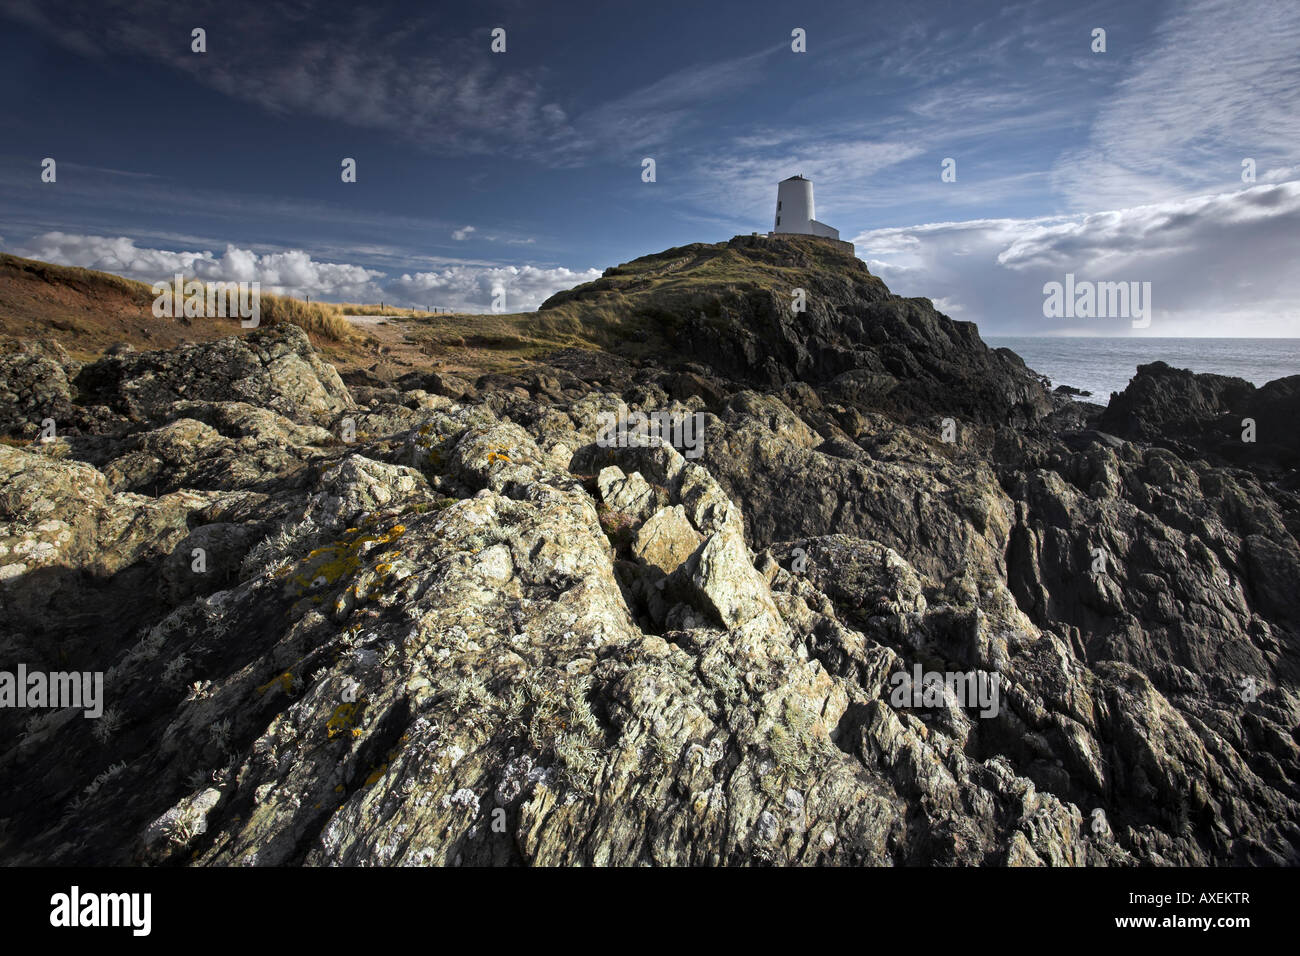 The Lighthouse at Llanddwyn island, Anglessy, North Wales, UK Stock Photo